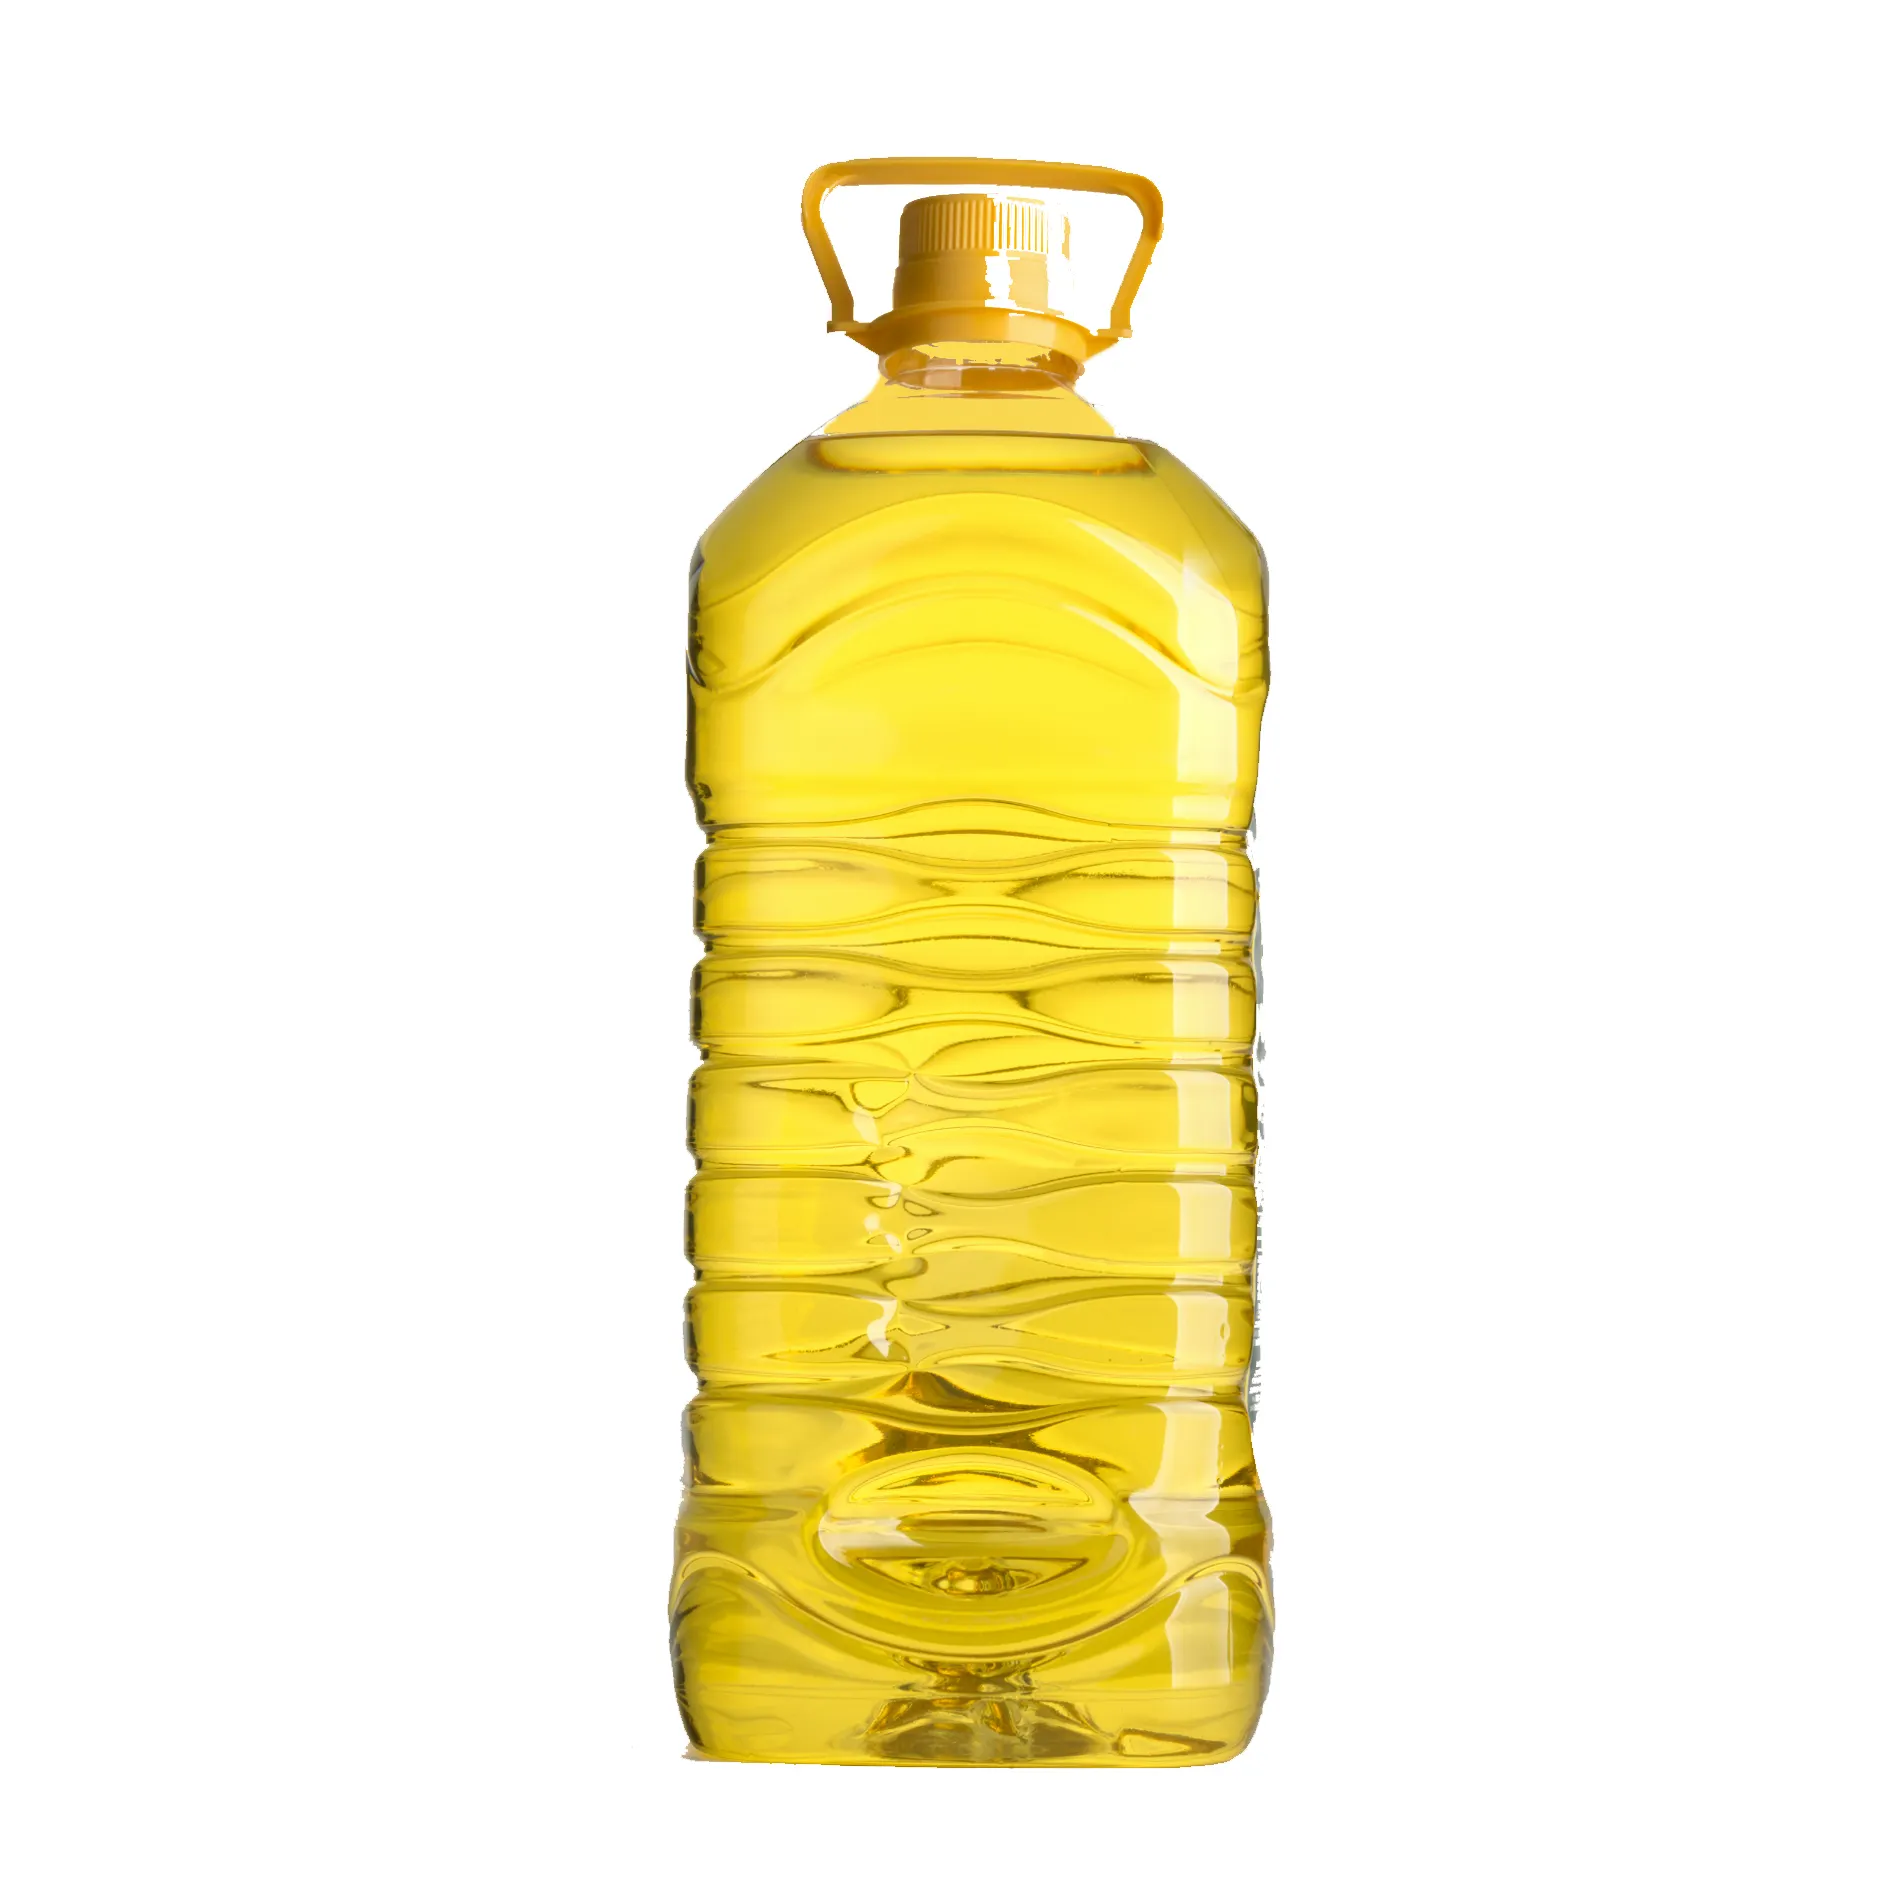 100% BEST QUALITY REFINED SUNFLOWER OIL READY FOR ANY PORT OF YOUR CHOICE